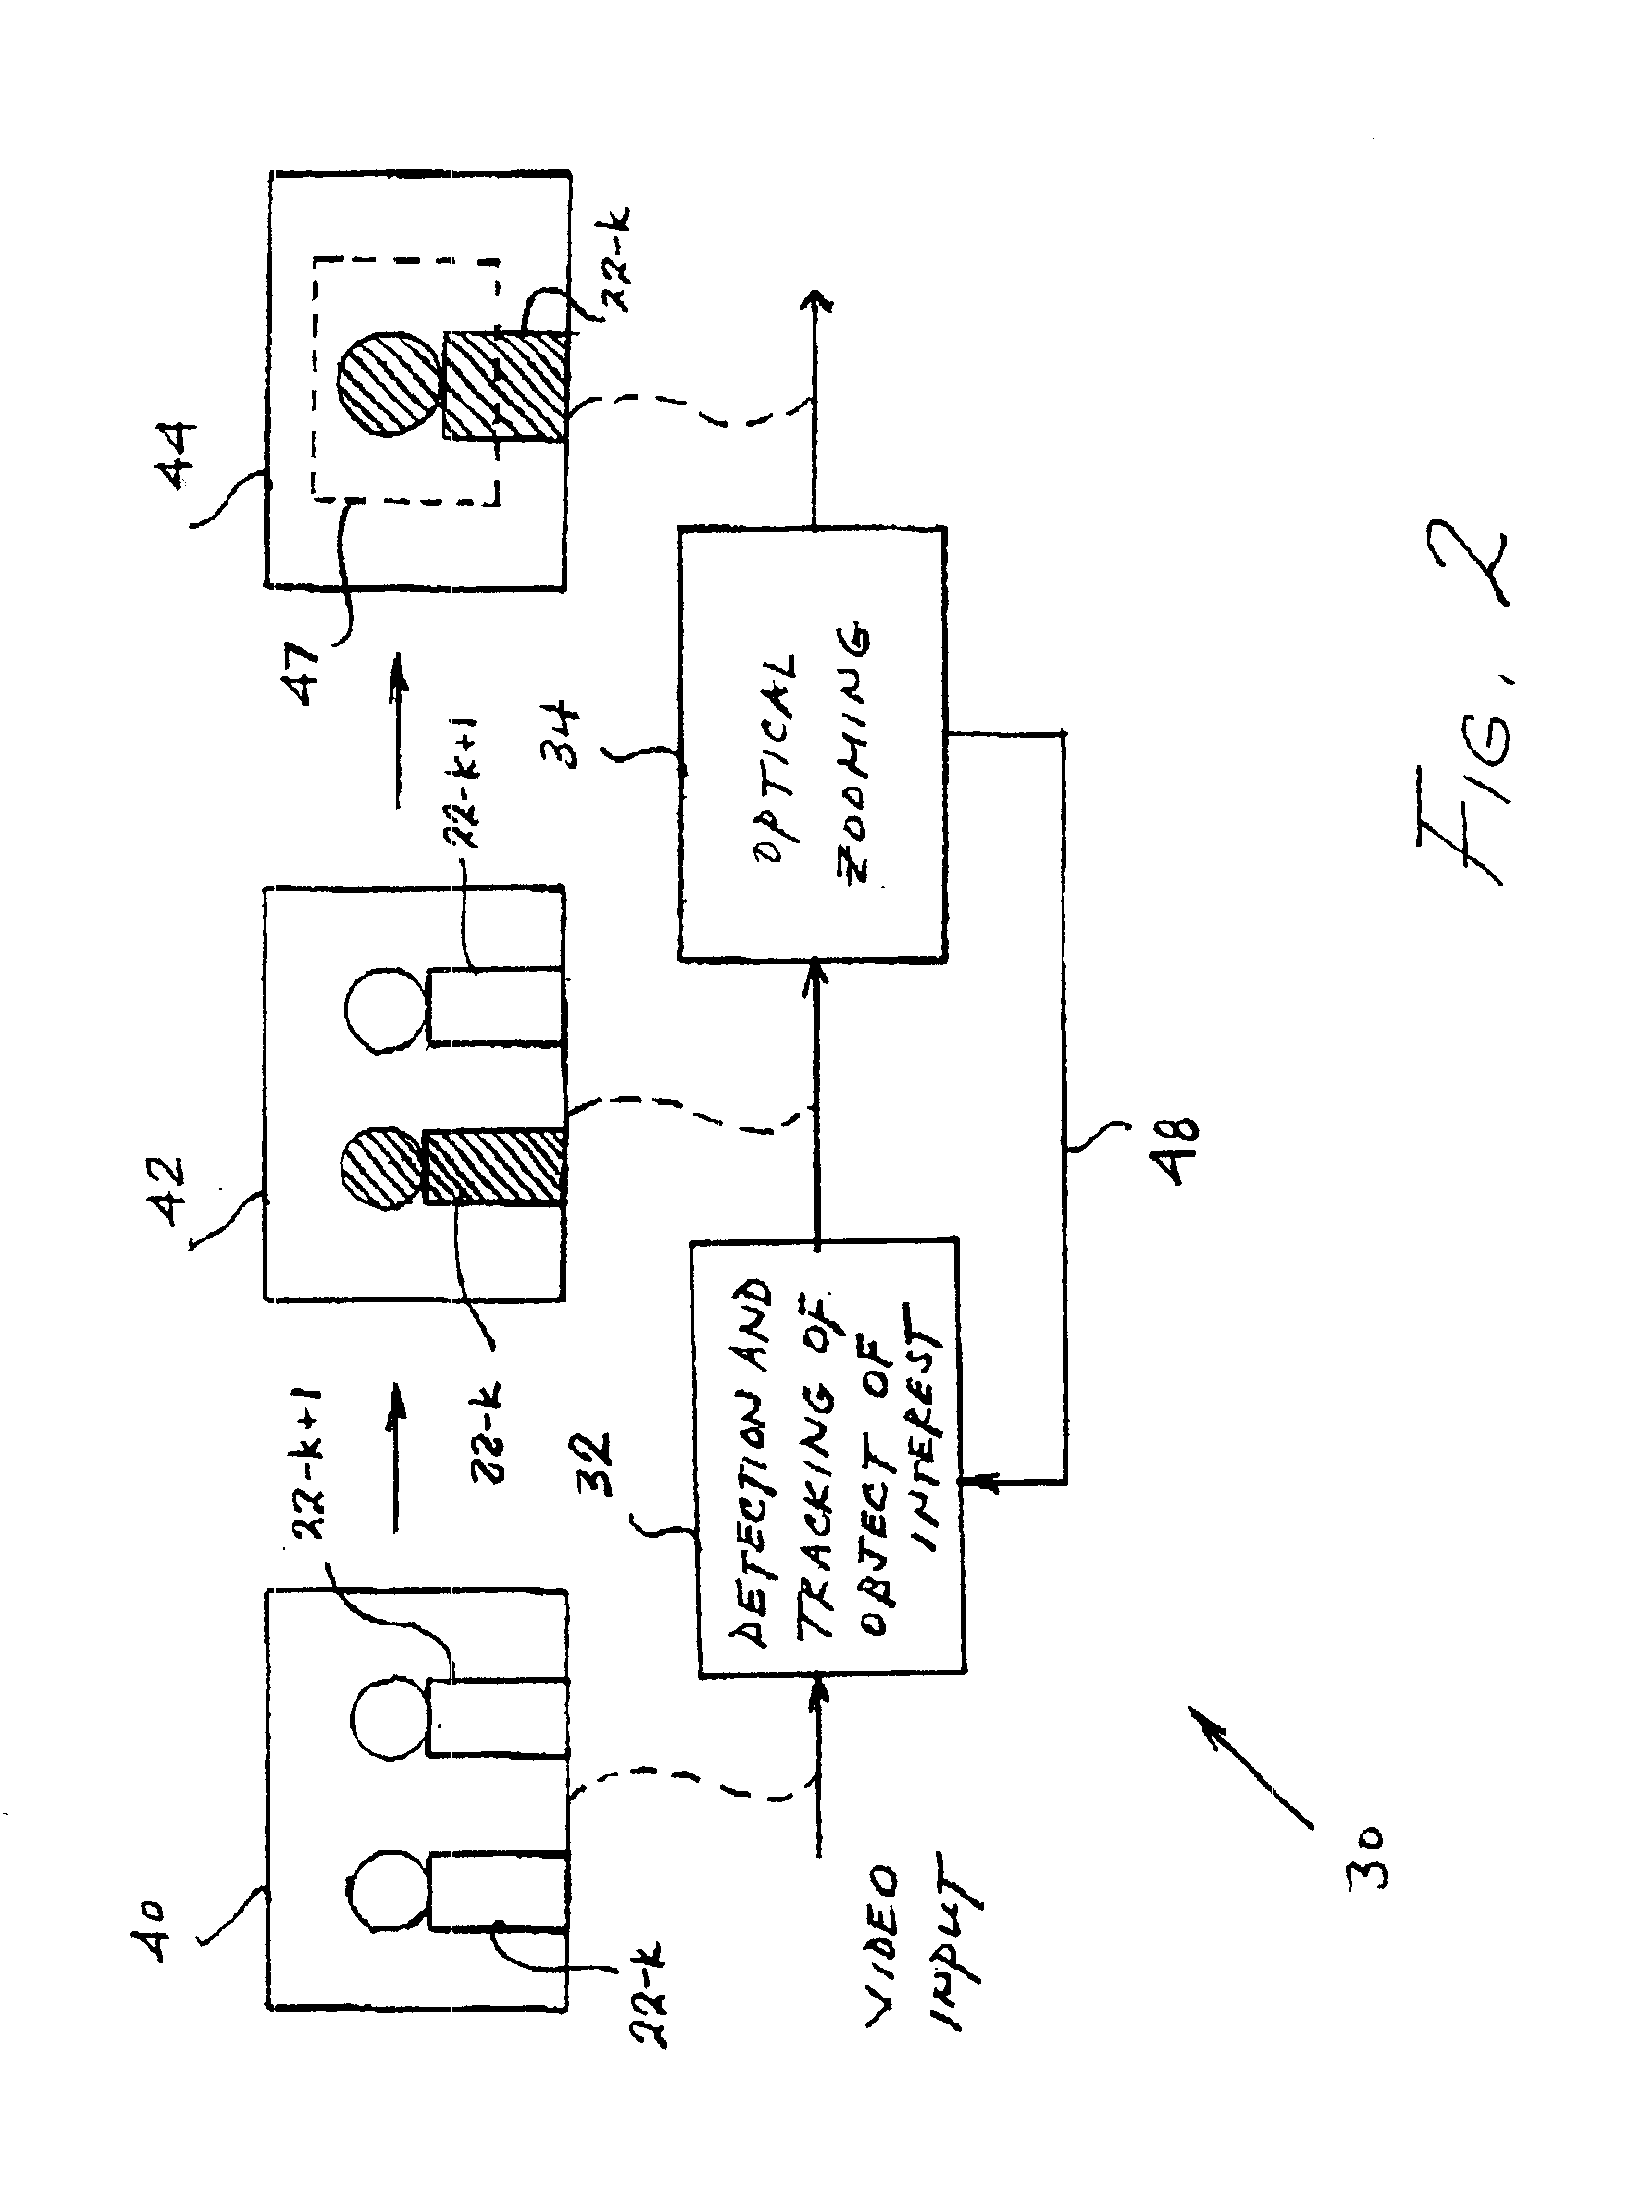 Method and apparatus for predicting events in video conferencing and other applications